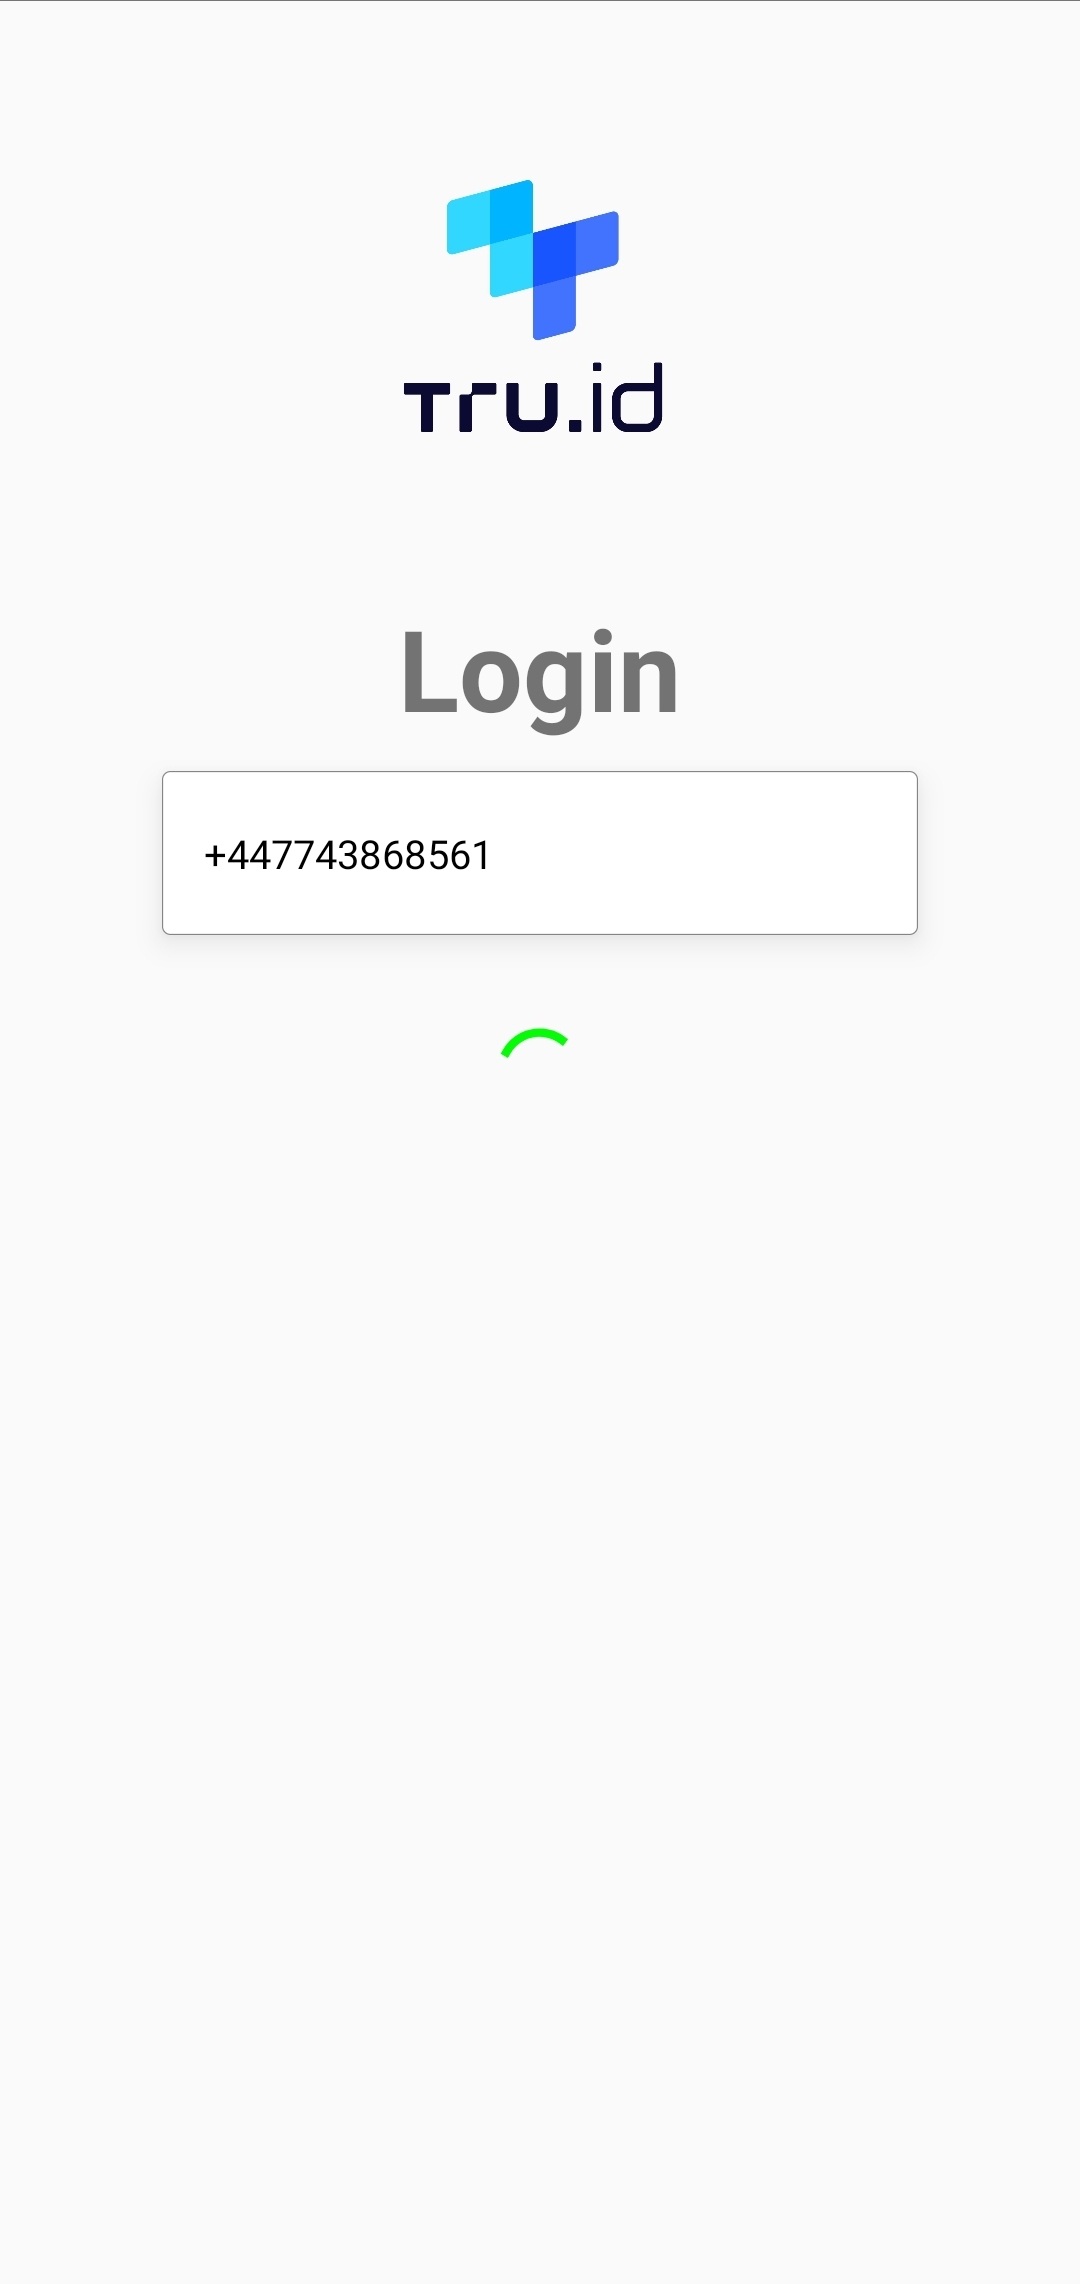 A tru.ID mobile app screen with the tru.ID logo, a phone number text input and a loading indicator.